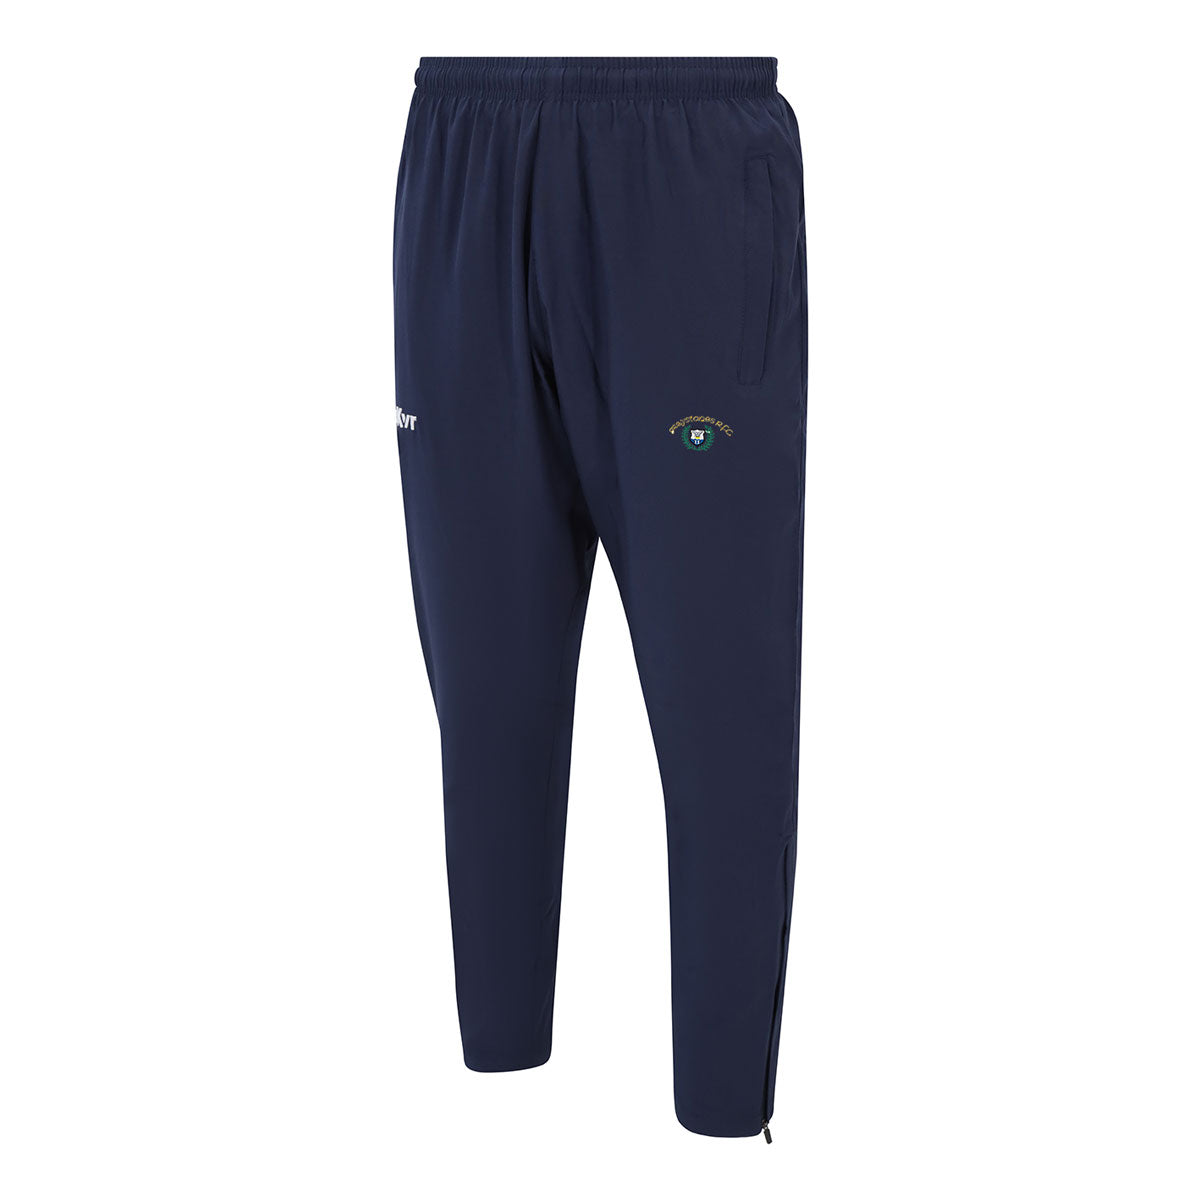 Mc Keever Greystones RFC Core 22 Tapered Pants - Youth - Navy